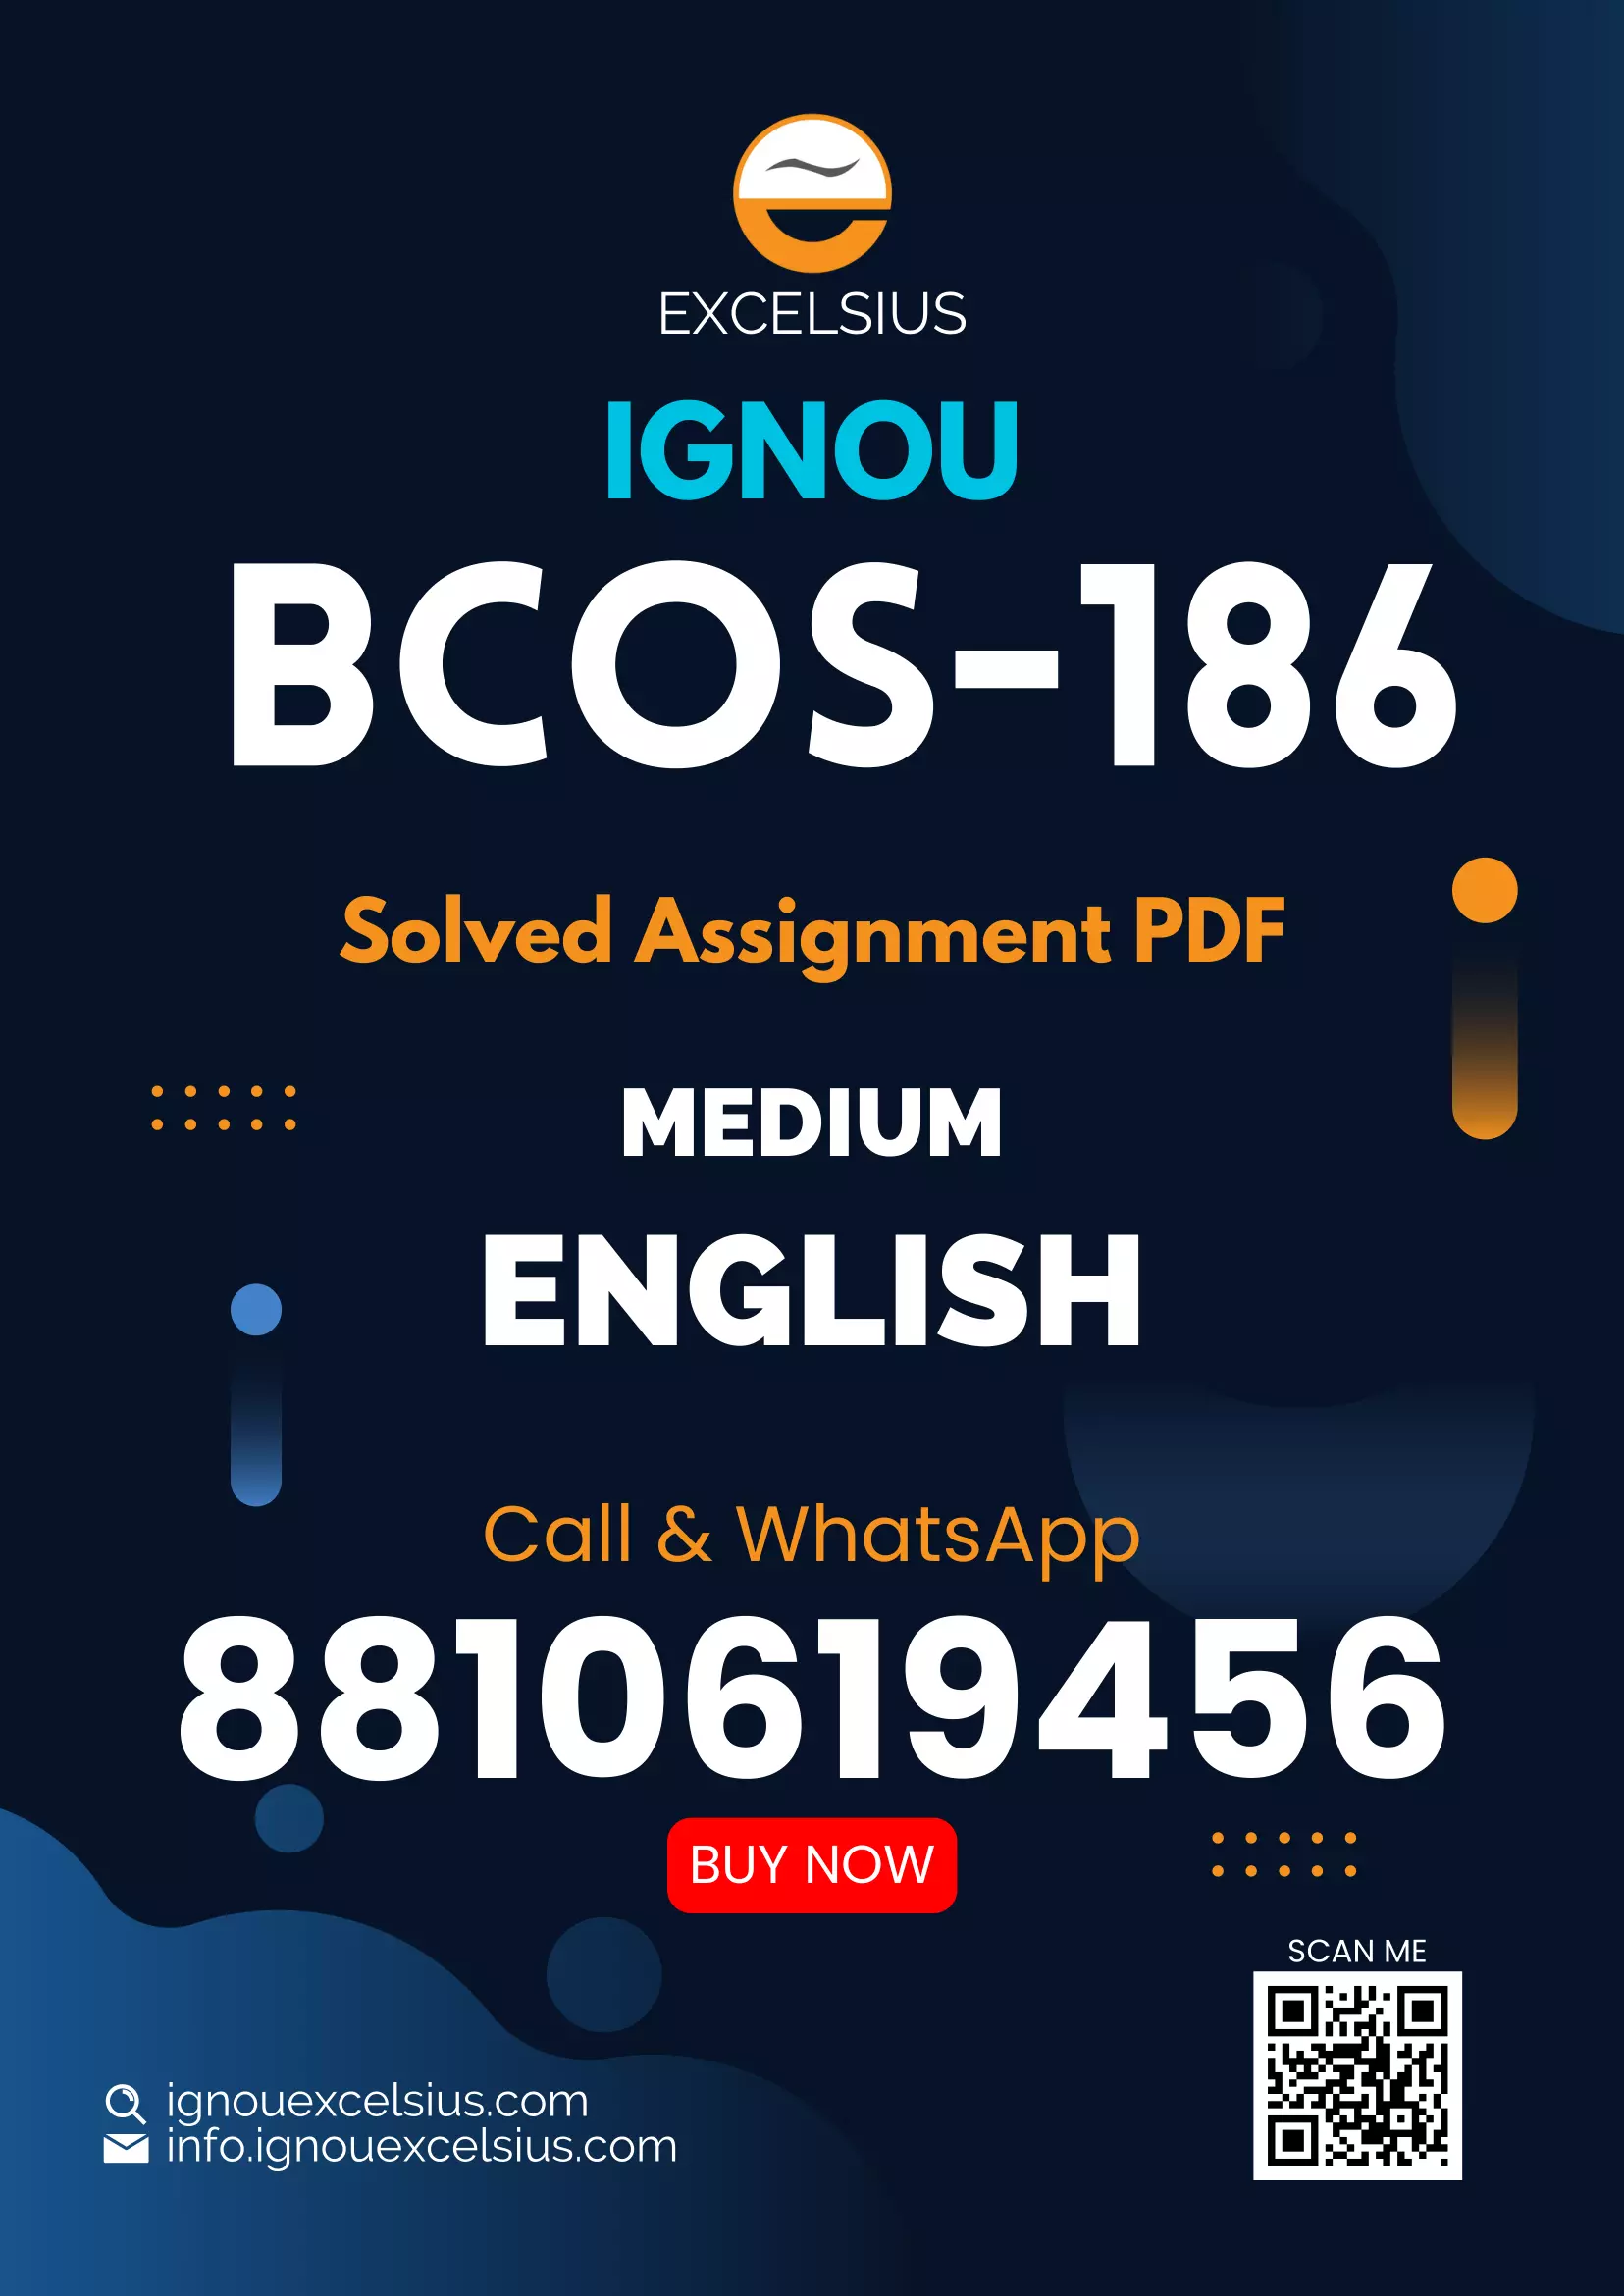 IGNOU BCOS-186 - Personal Selling and Salesmanship, Latest Solved Assignment-January 2023 - December 2023